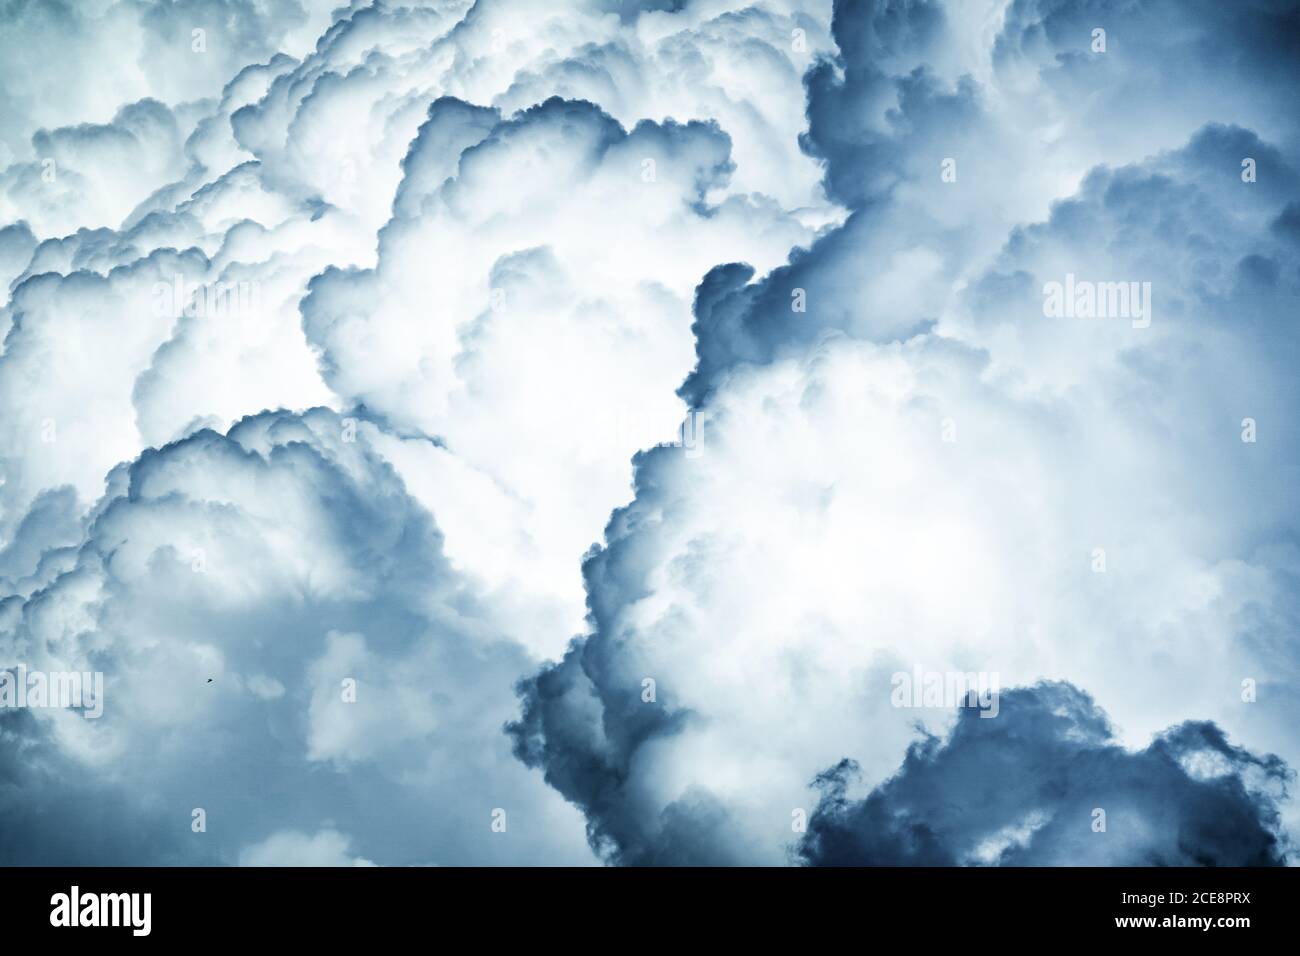 Spectacular abstract background of thunderstorm sky with dark ominous clouds Stock Photo